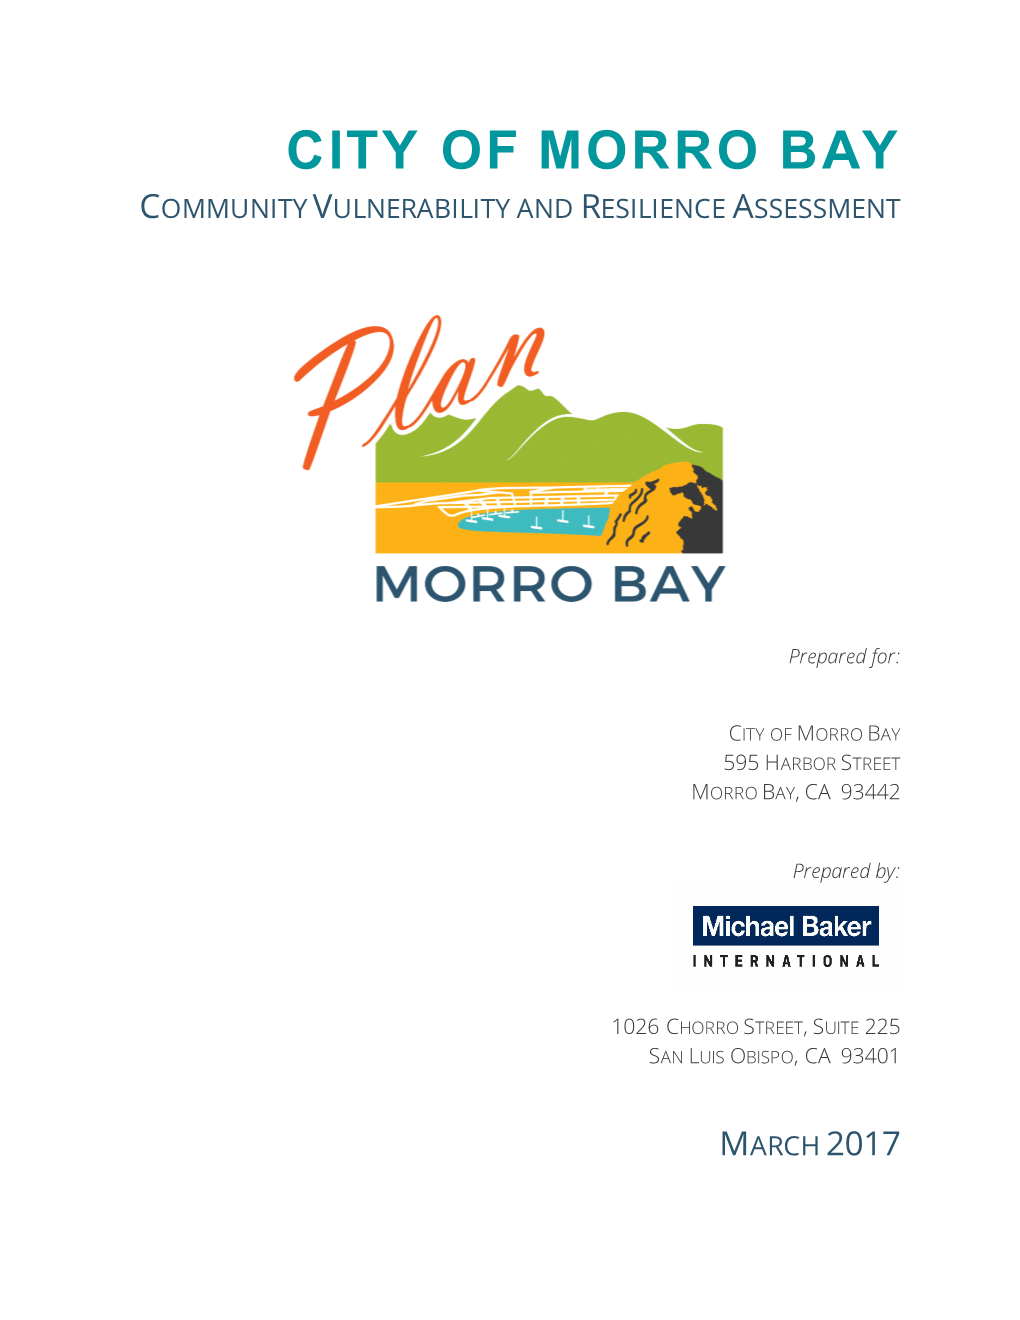 City of Morro Bay Community Vulnerability and Resiliency